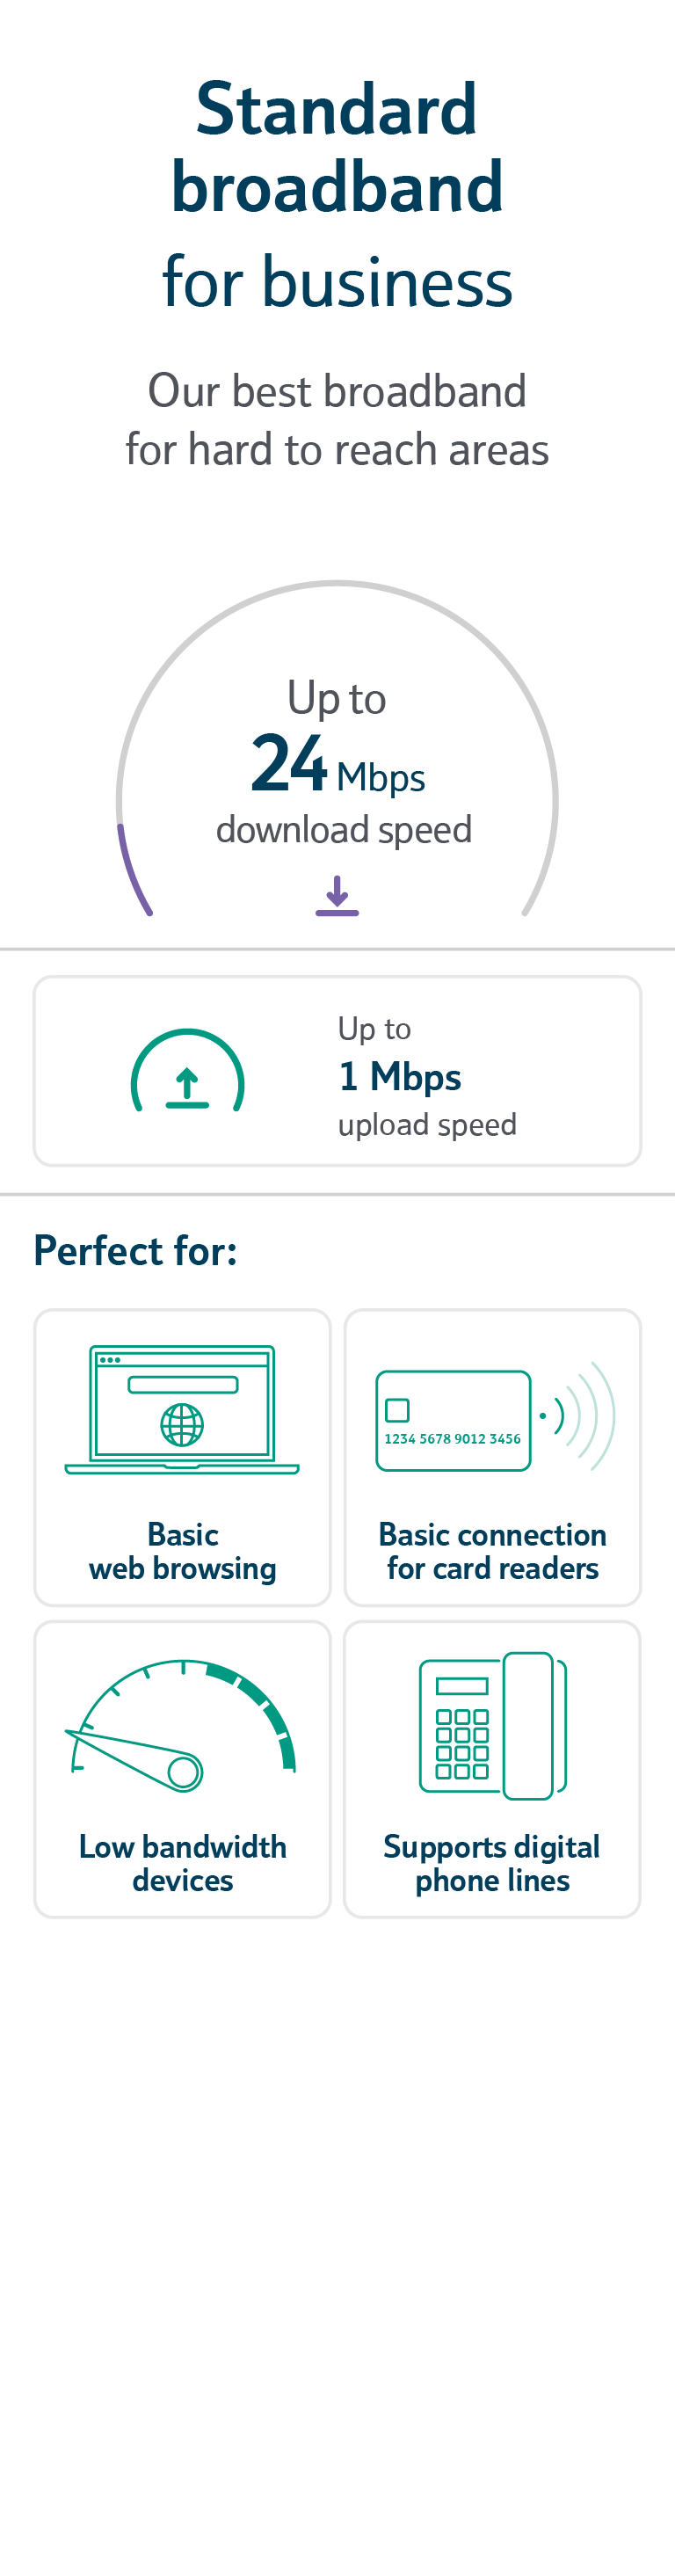 Standard broadband for business comparison card with icons